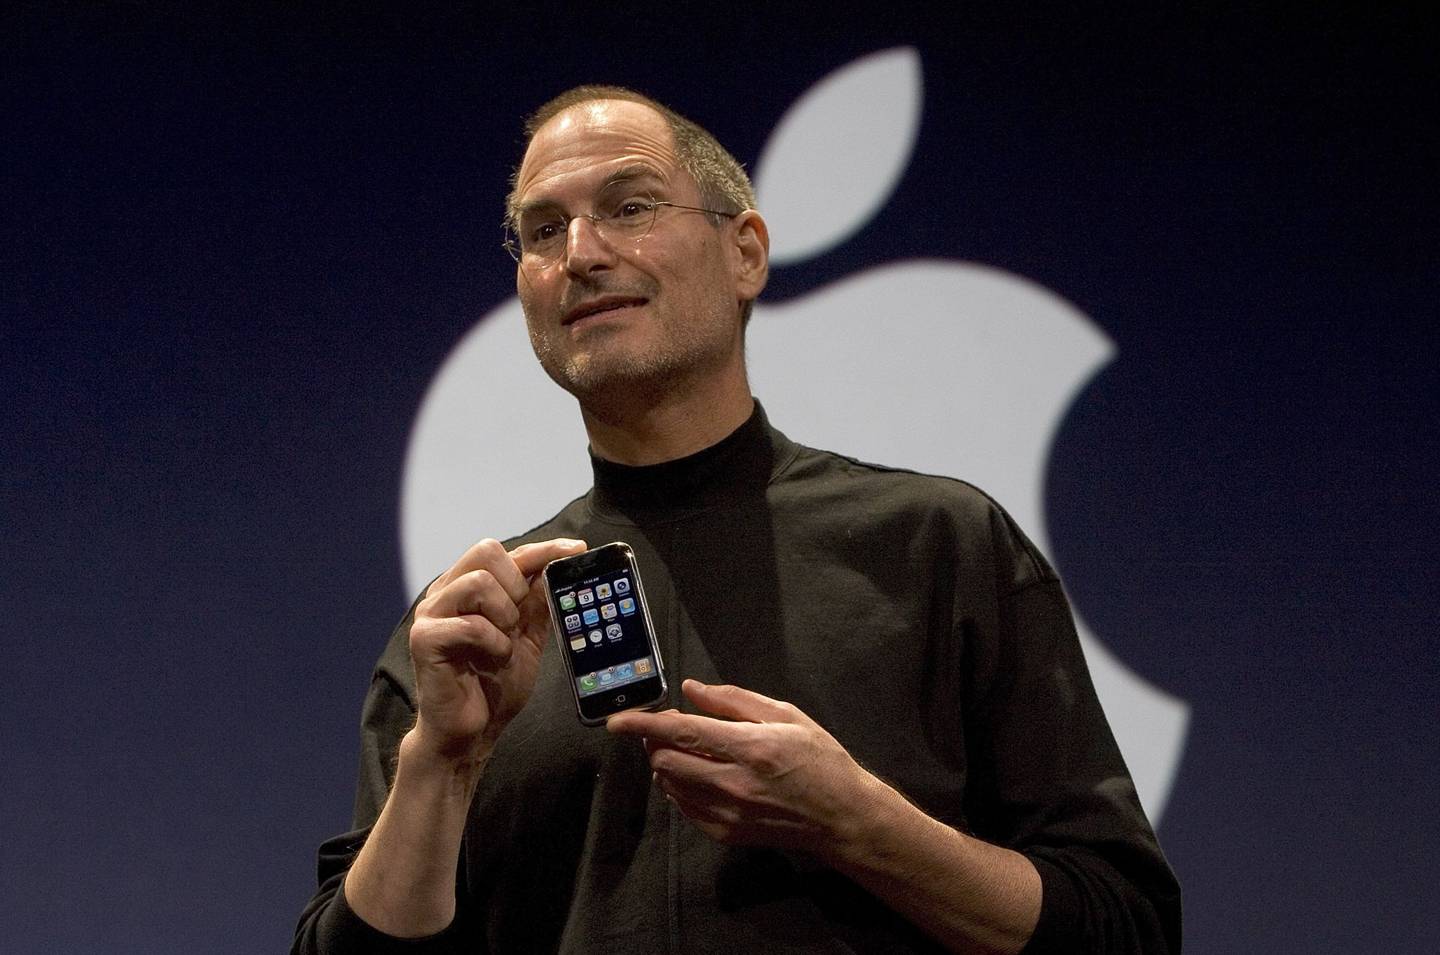 Apple and two key moments in its history: from the iPhone with Steve Jobs to Reality Pro with Tim Cook